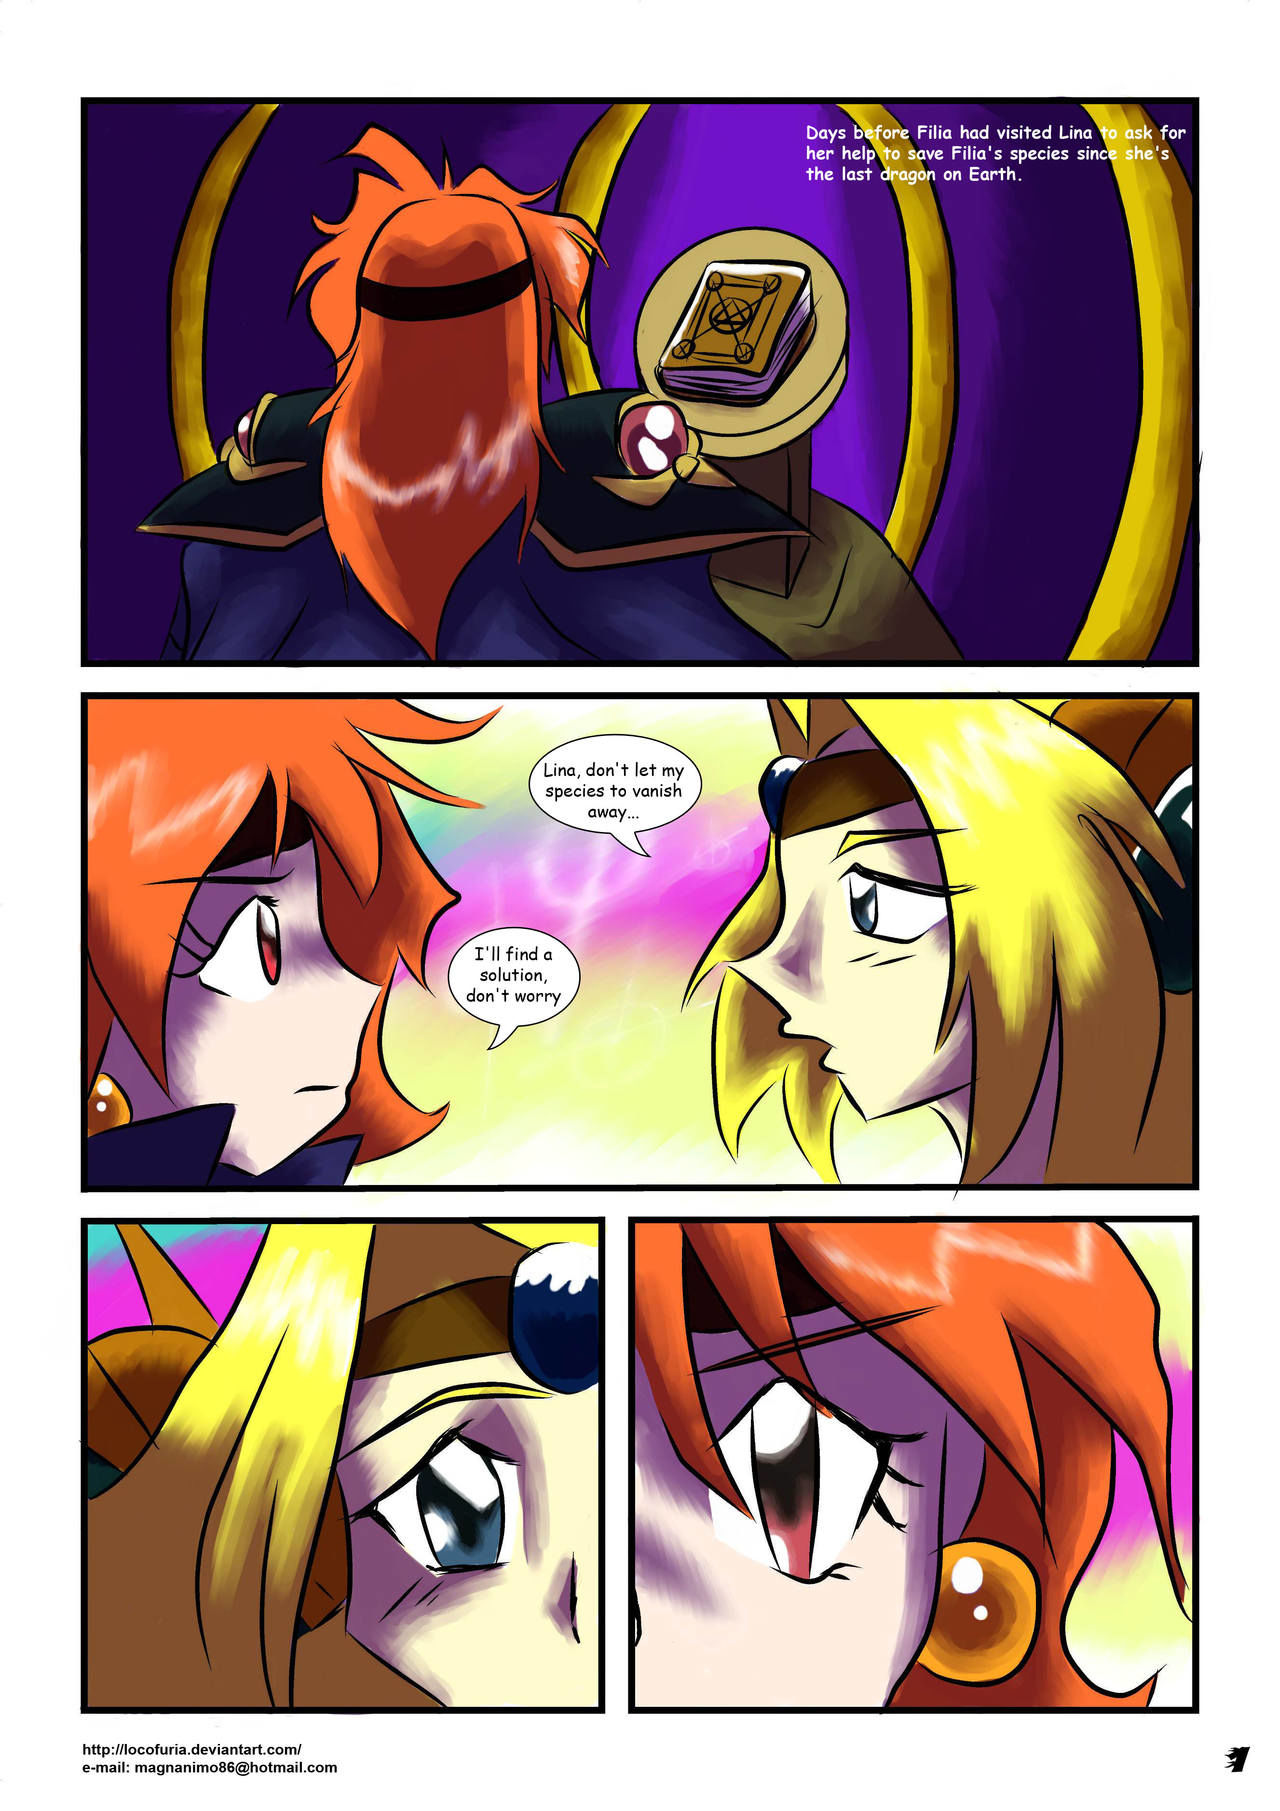 The Last Dragon (Slayers) by Locofuria page 3